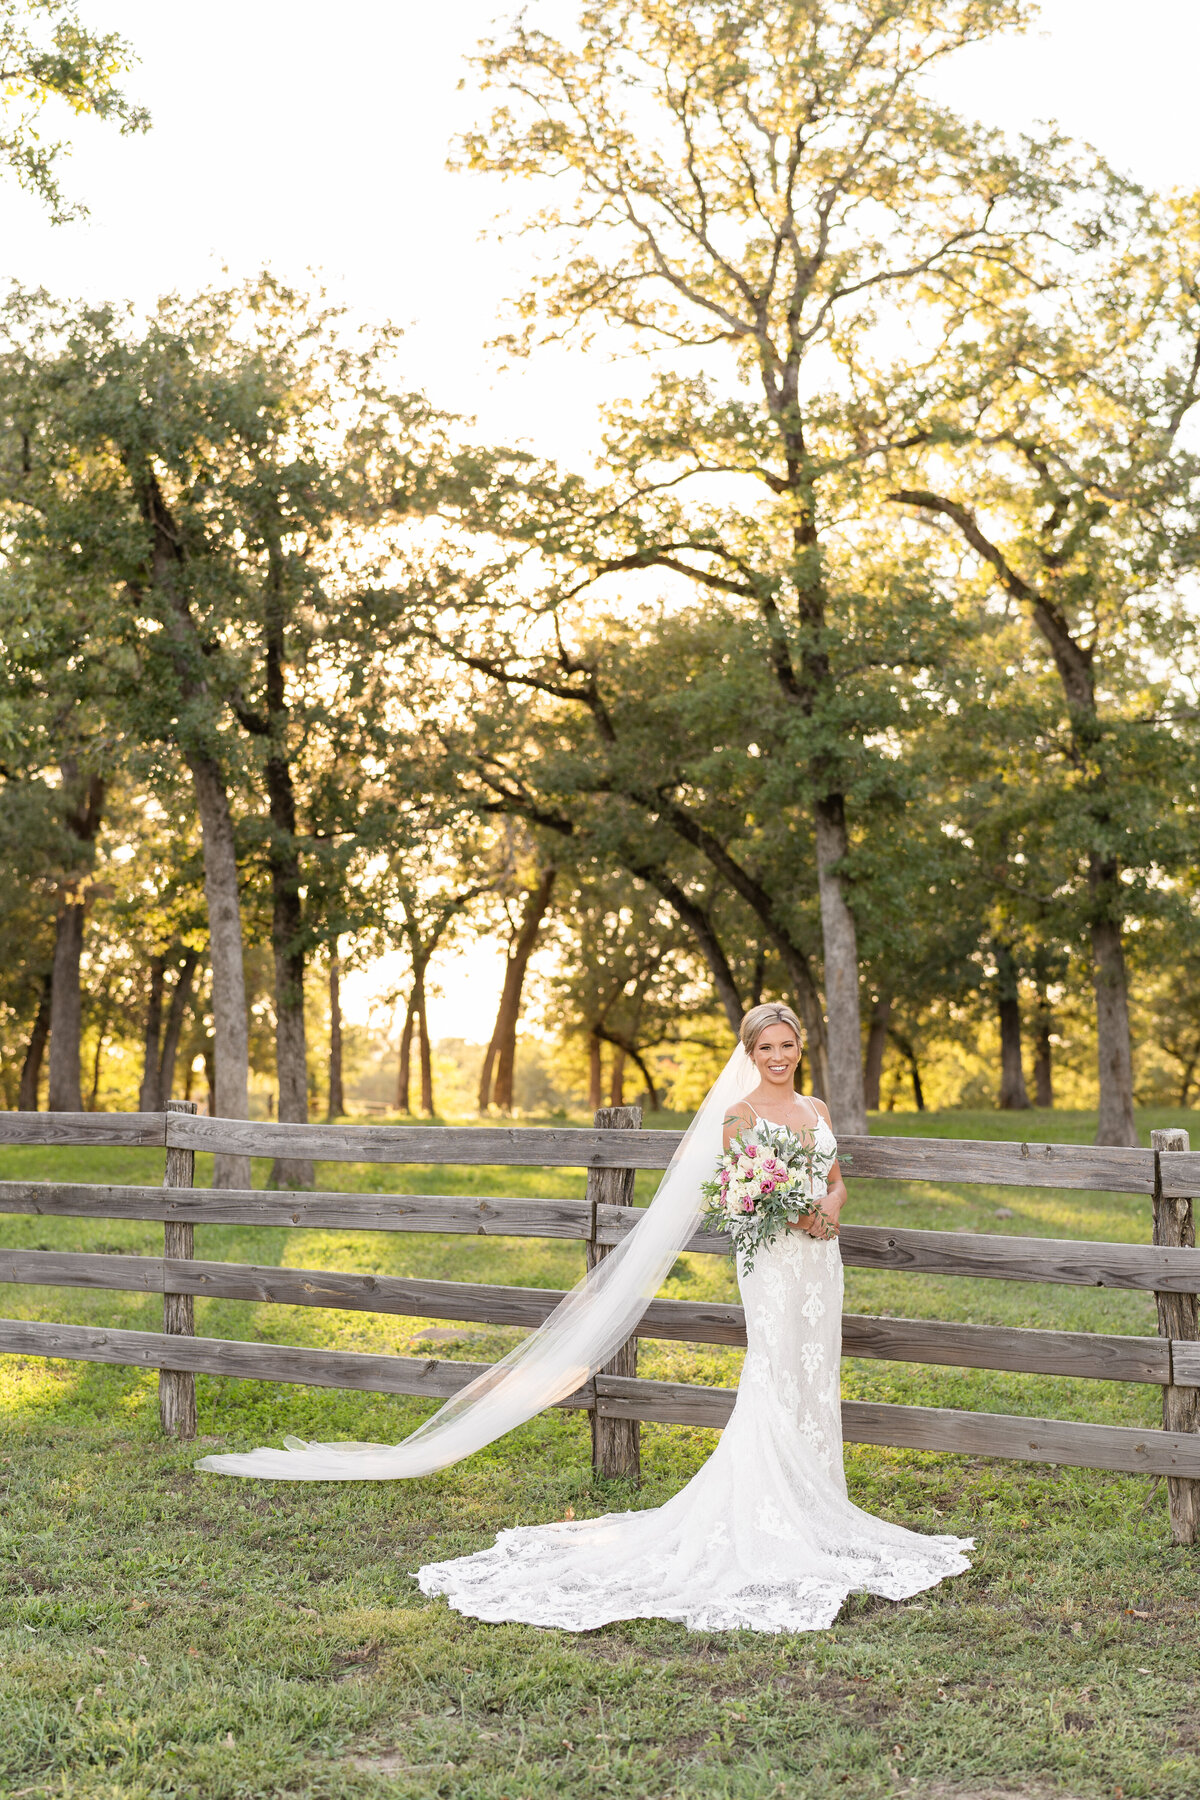 Bride holding bouquet with cathedral length veil in front of an old wooden fence and beautiful tall trees at sunset